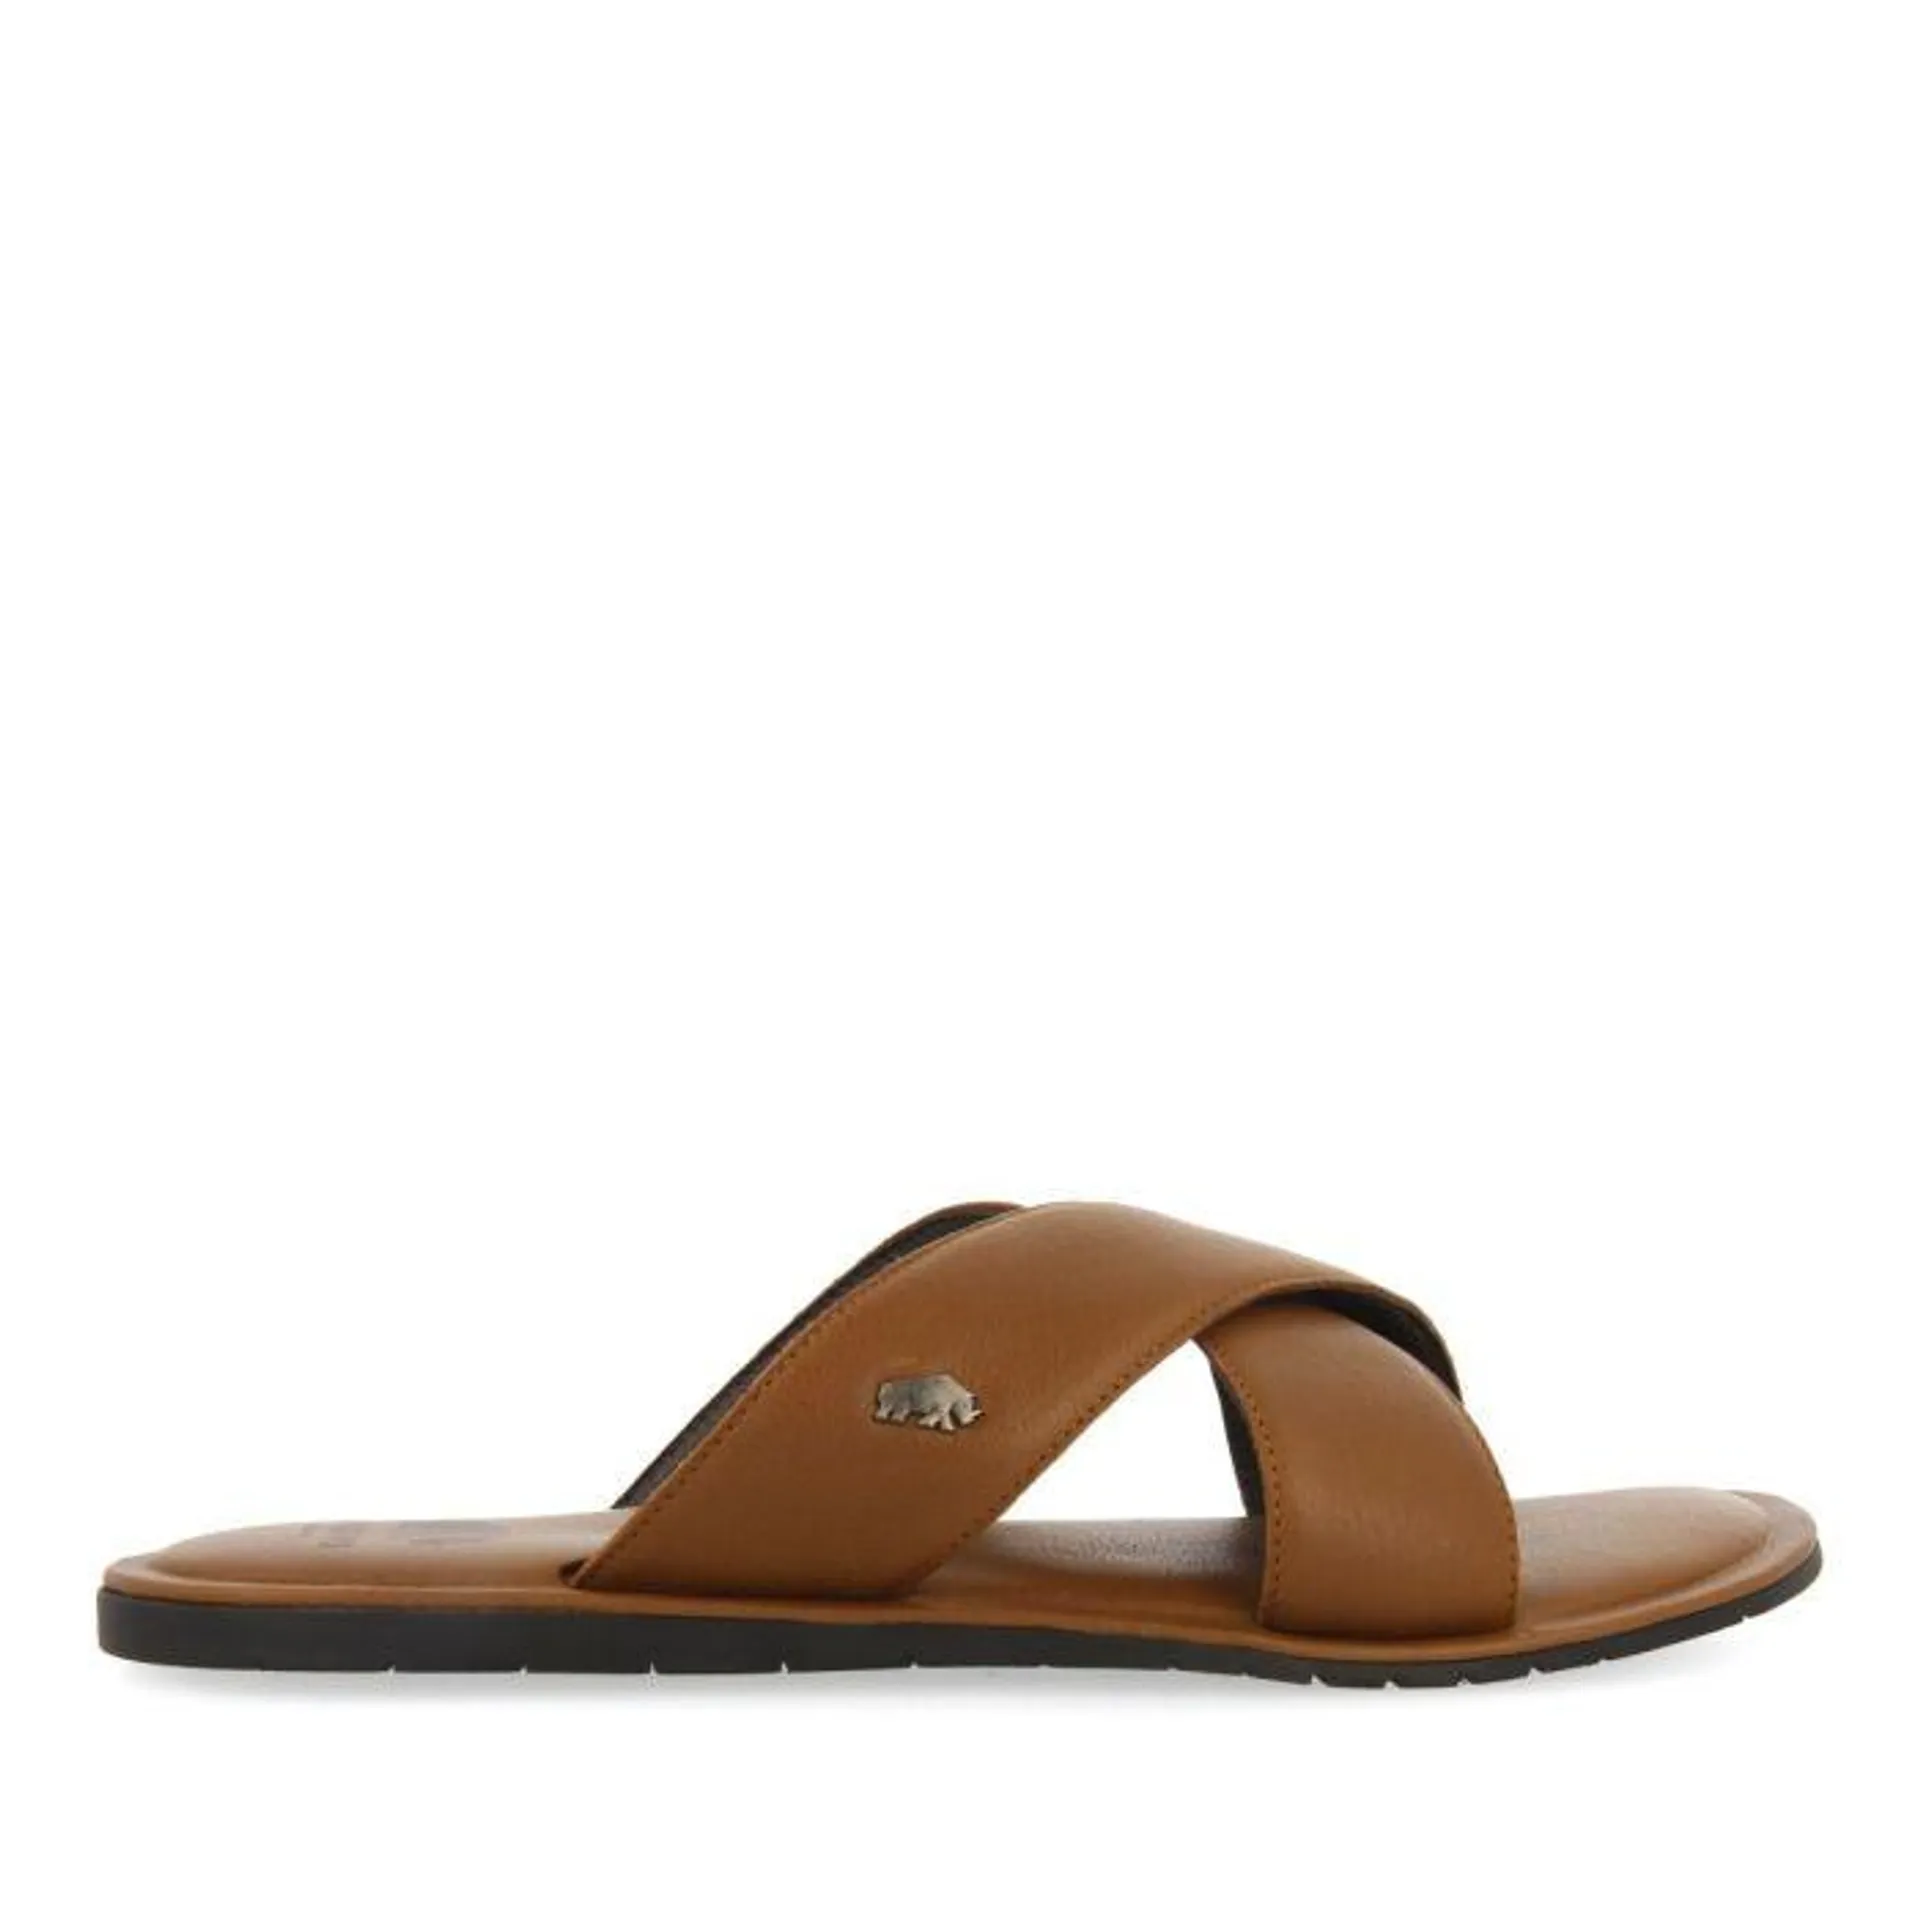 LEATHER SKIN SANDALS WITH CROSS STRAP FOR MEN OROSH